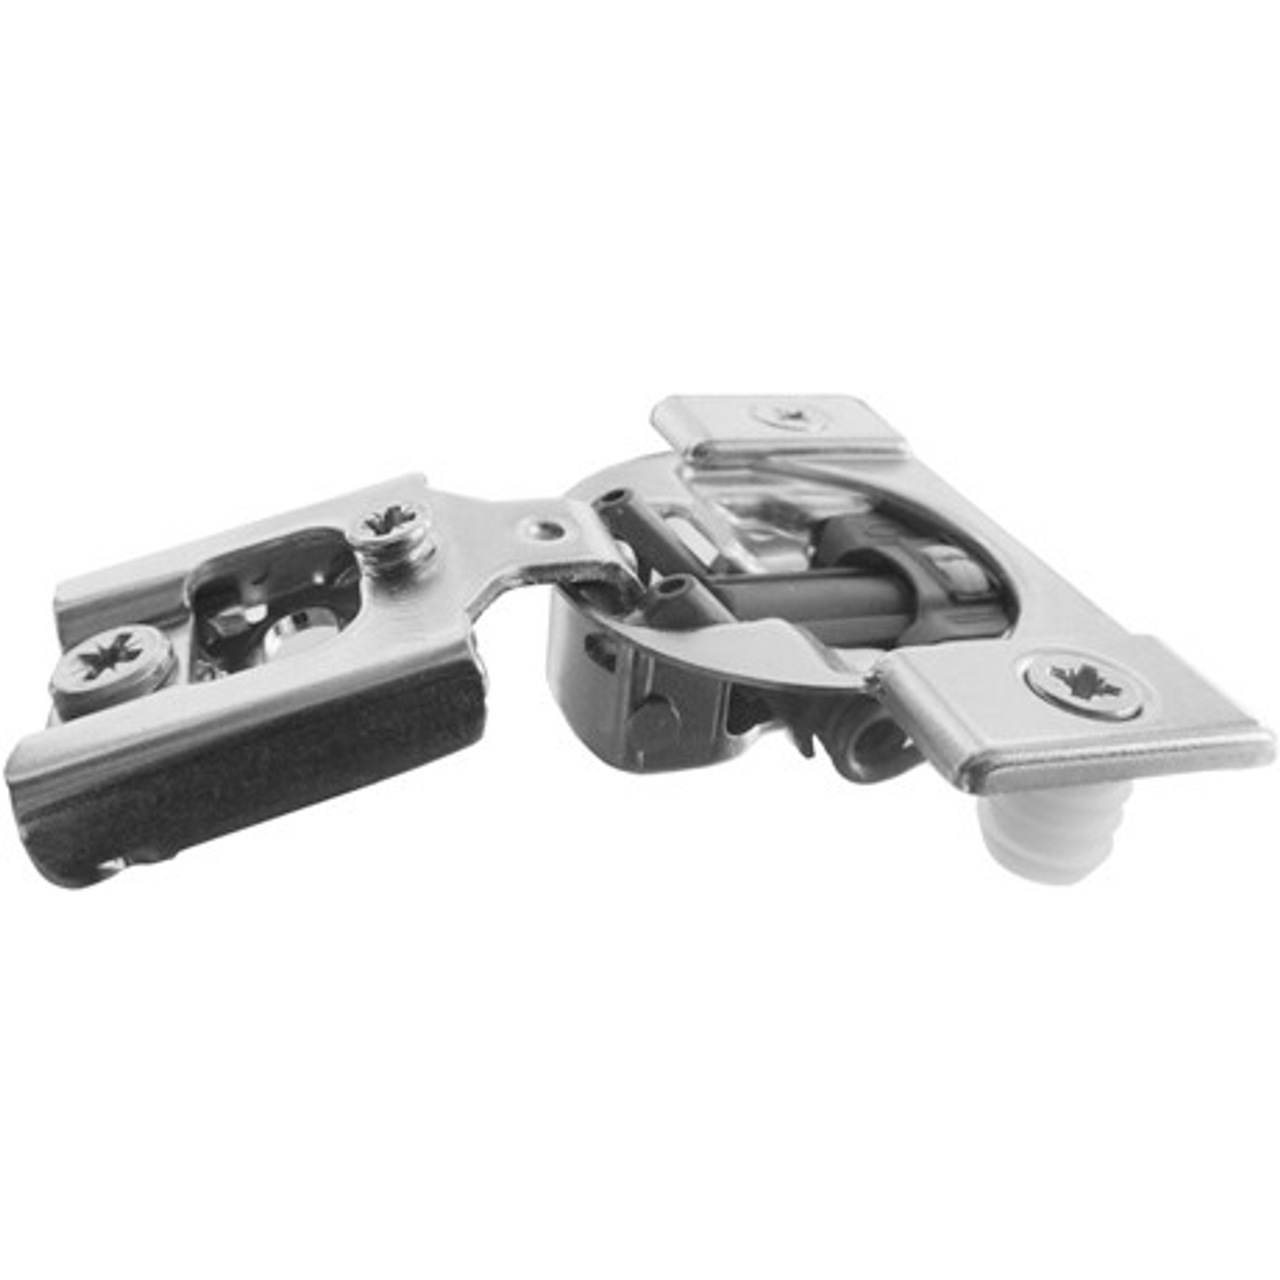 Blum 38N358B.05 Compact BLUMOTION Soft-Close 38N Face Frame Hinge 5/16 Inch Overlay Press-In